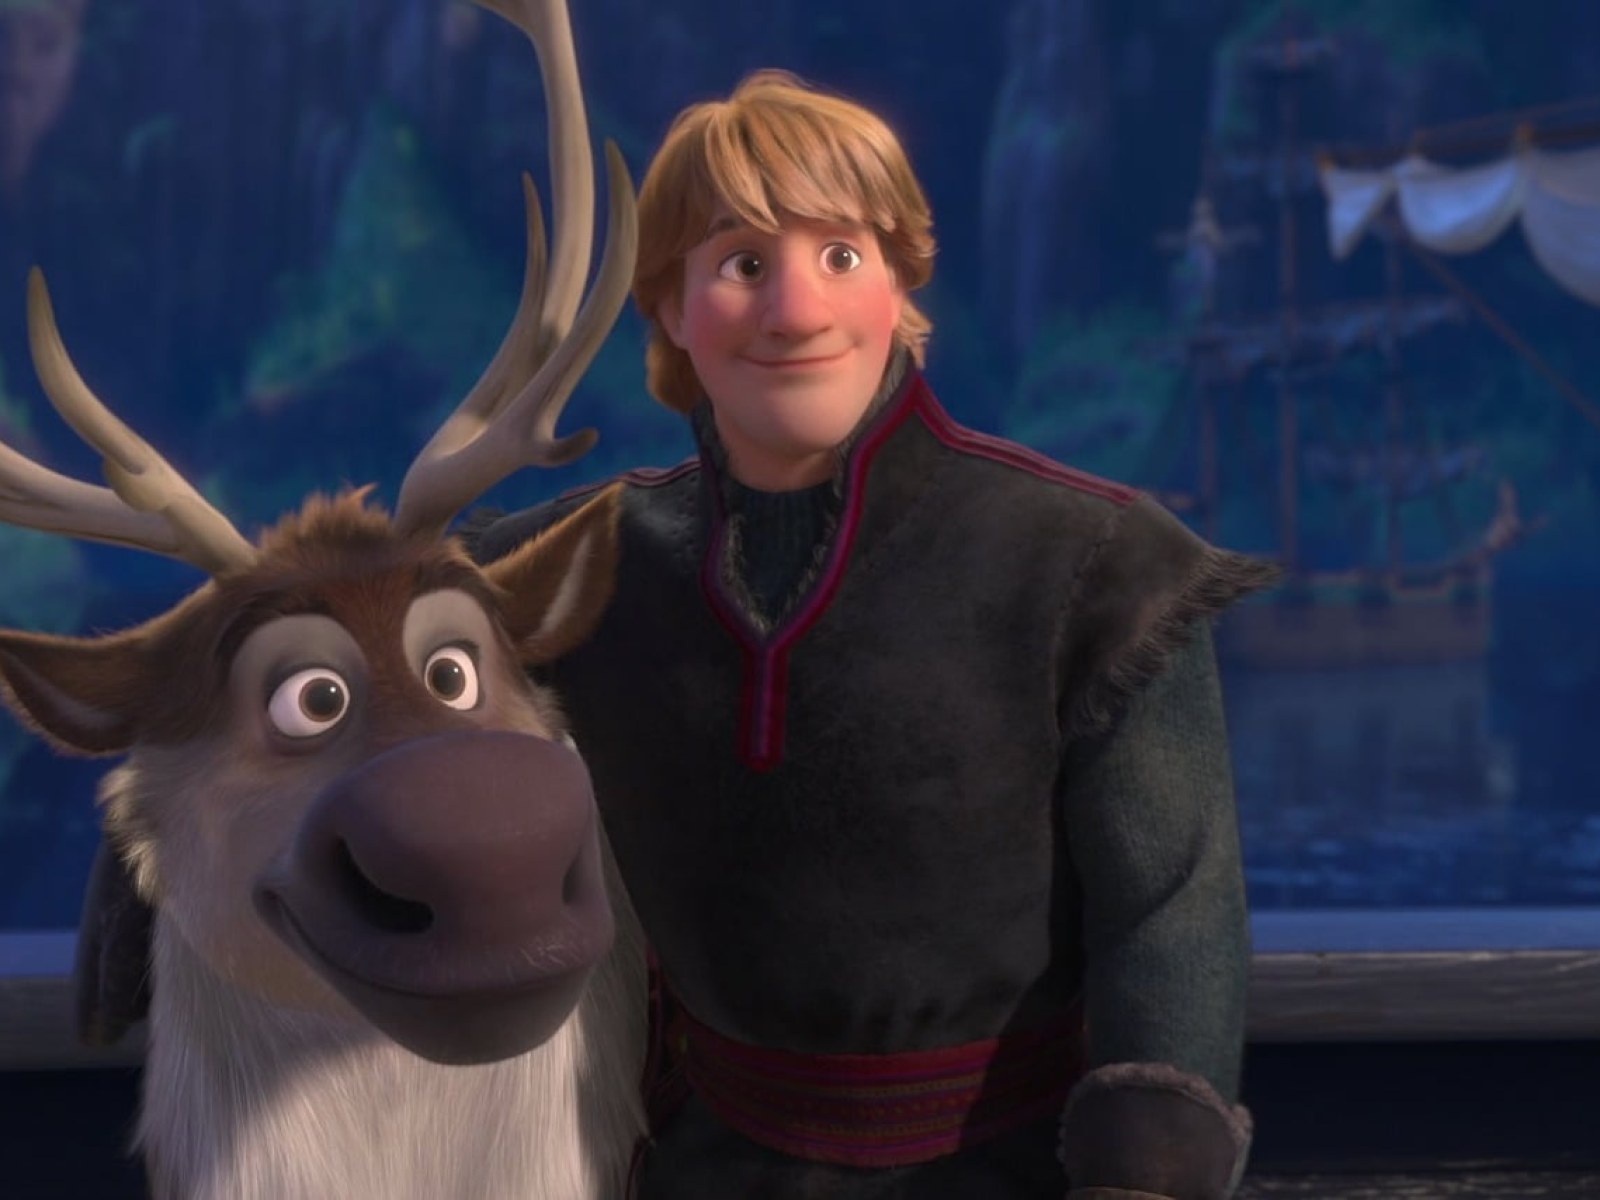 Frozen 2 Soundtrack What Are The New Songs Images, Photos, Reviews